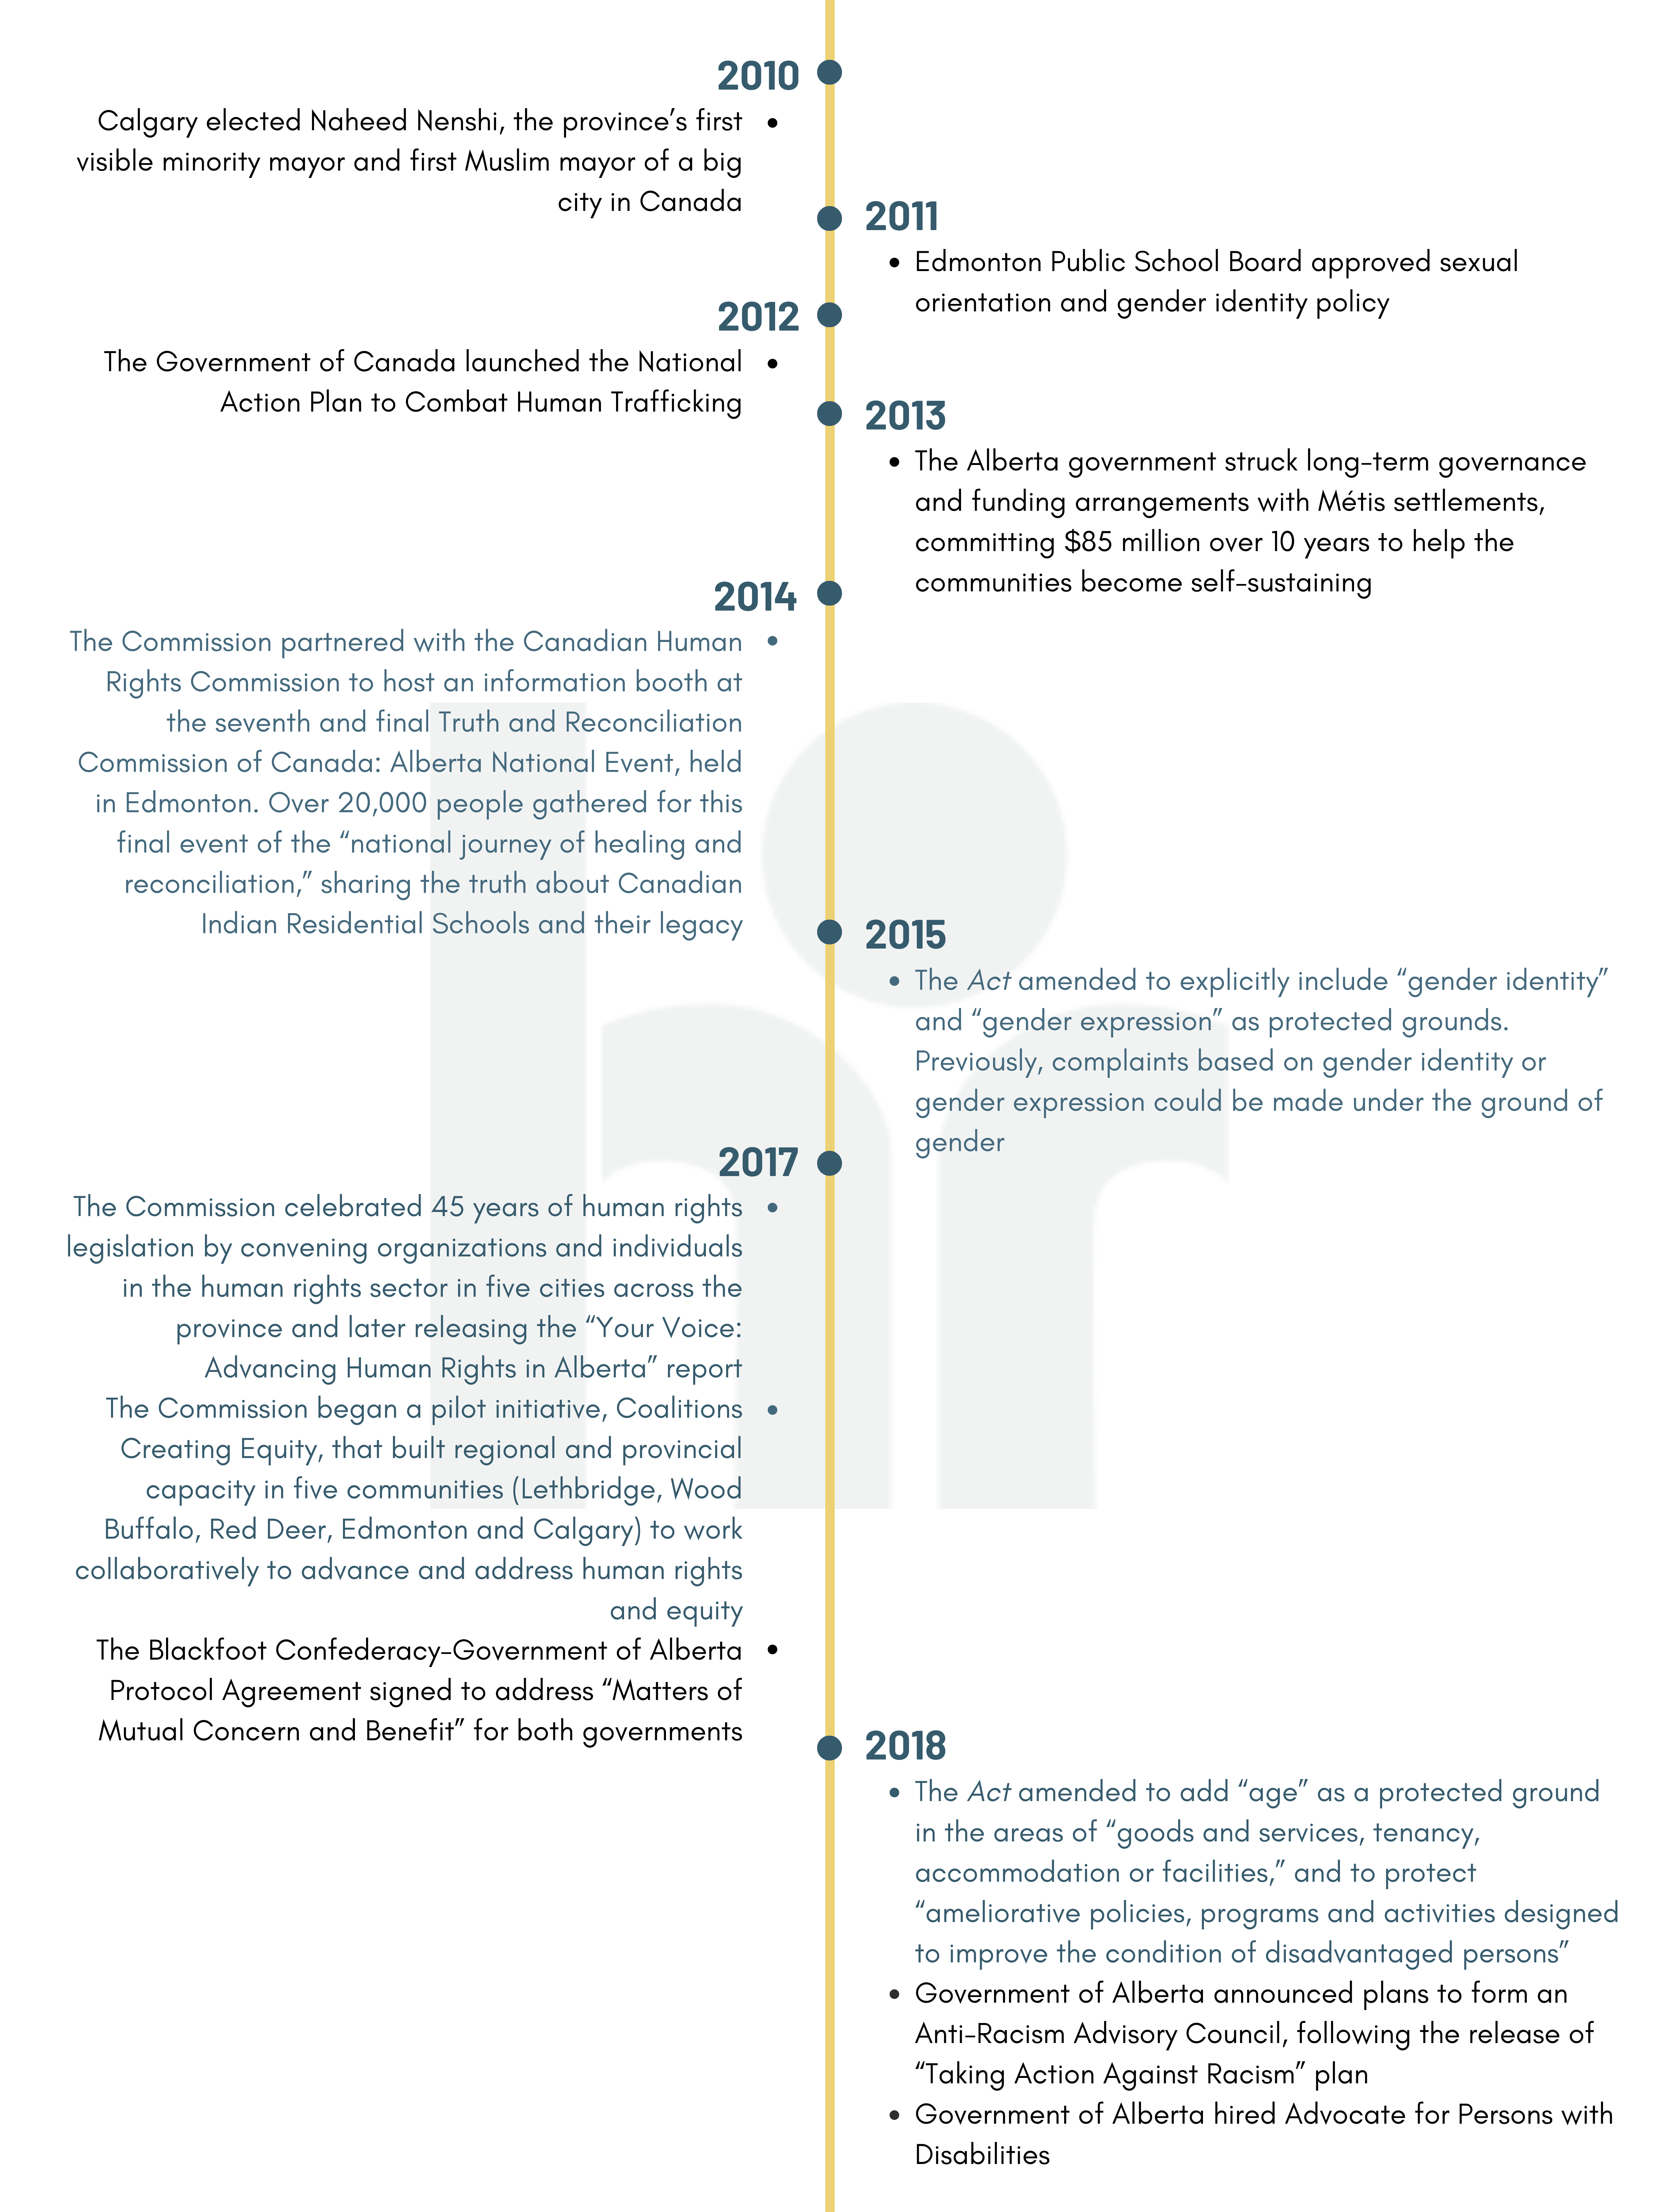 Timeline from 2010 to 2018 describing significant events in Alberta's human rights history. See link at top of page for full text.